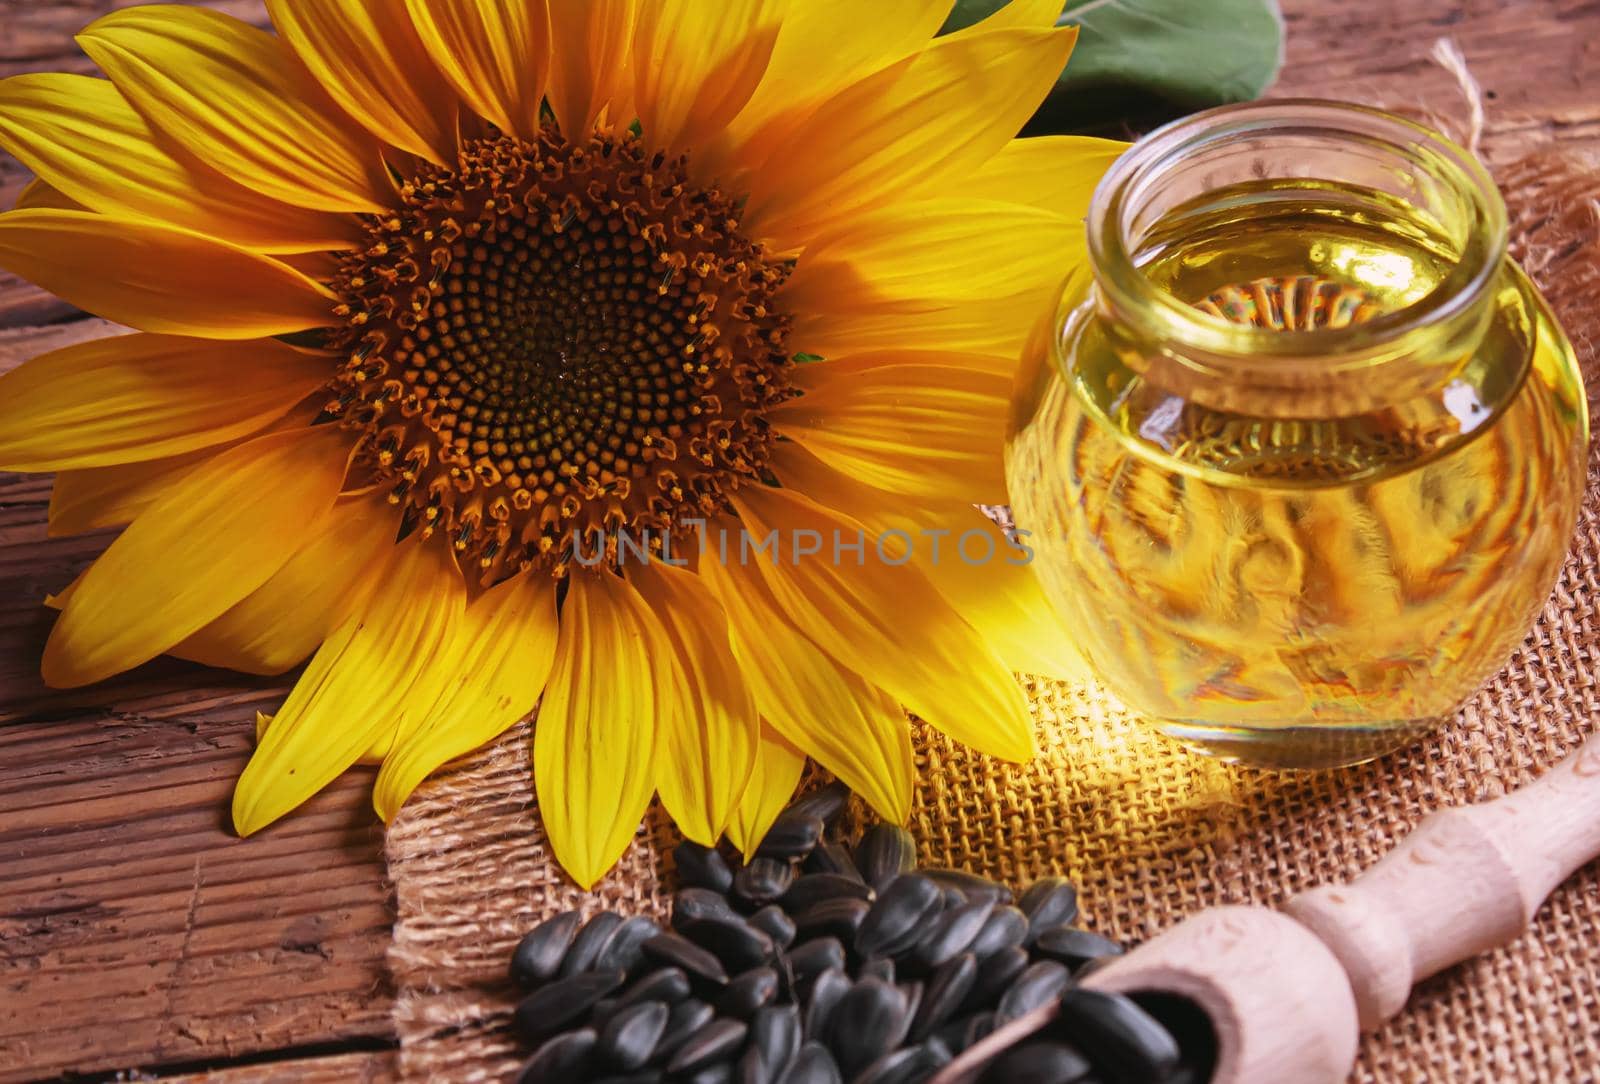 Sunflower seeds and oil bottle on old wooden background. Selective focus. by mila1784